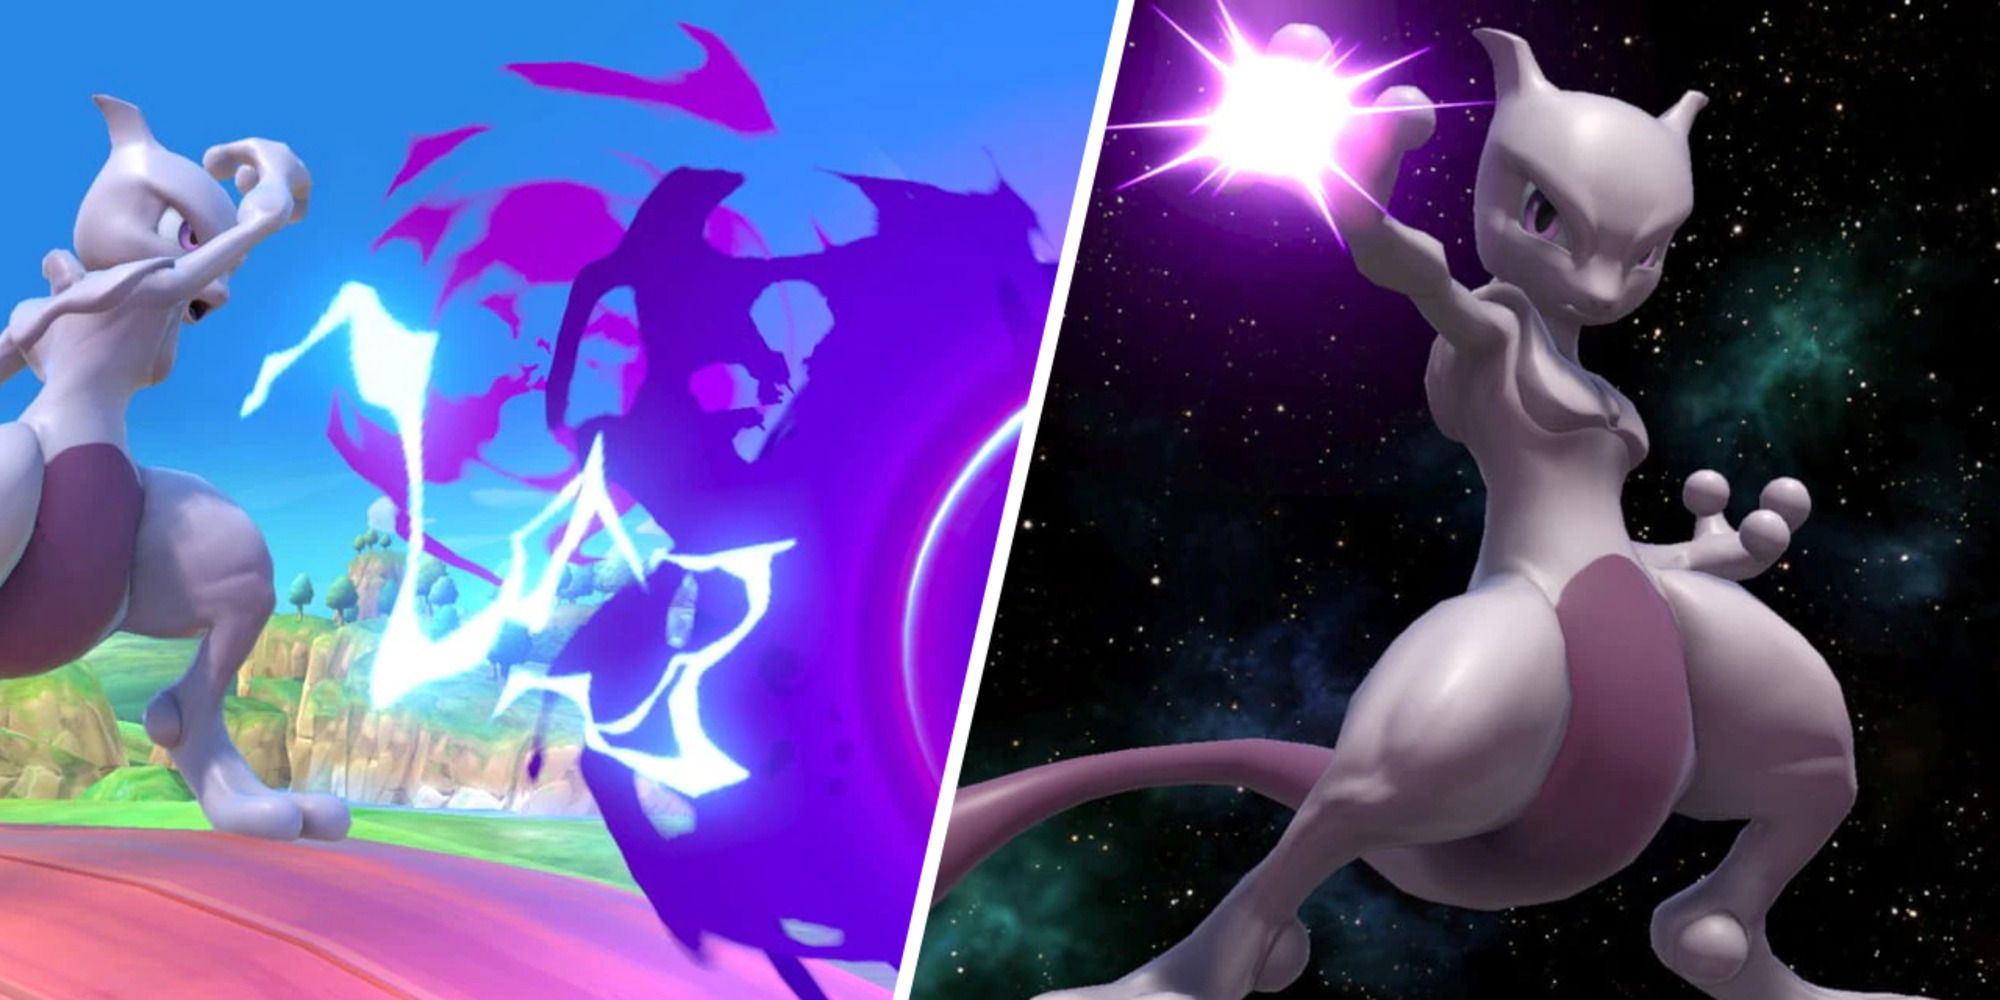 Mewtwo using his Neutral-B and Down Taunt in Super Smash Bros. Ultimate.